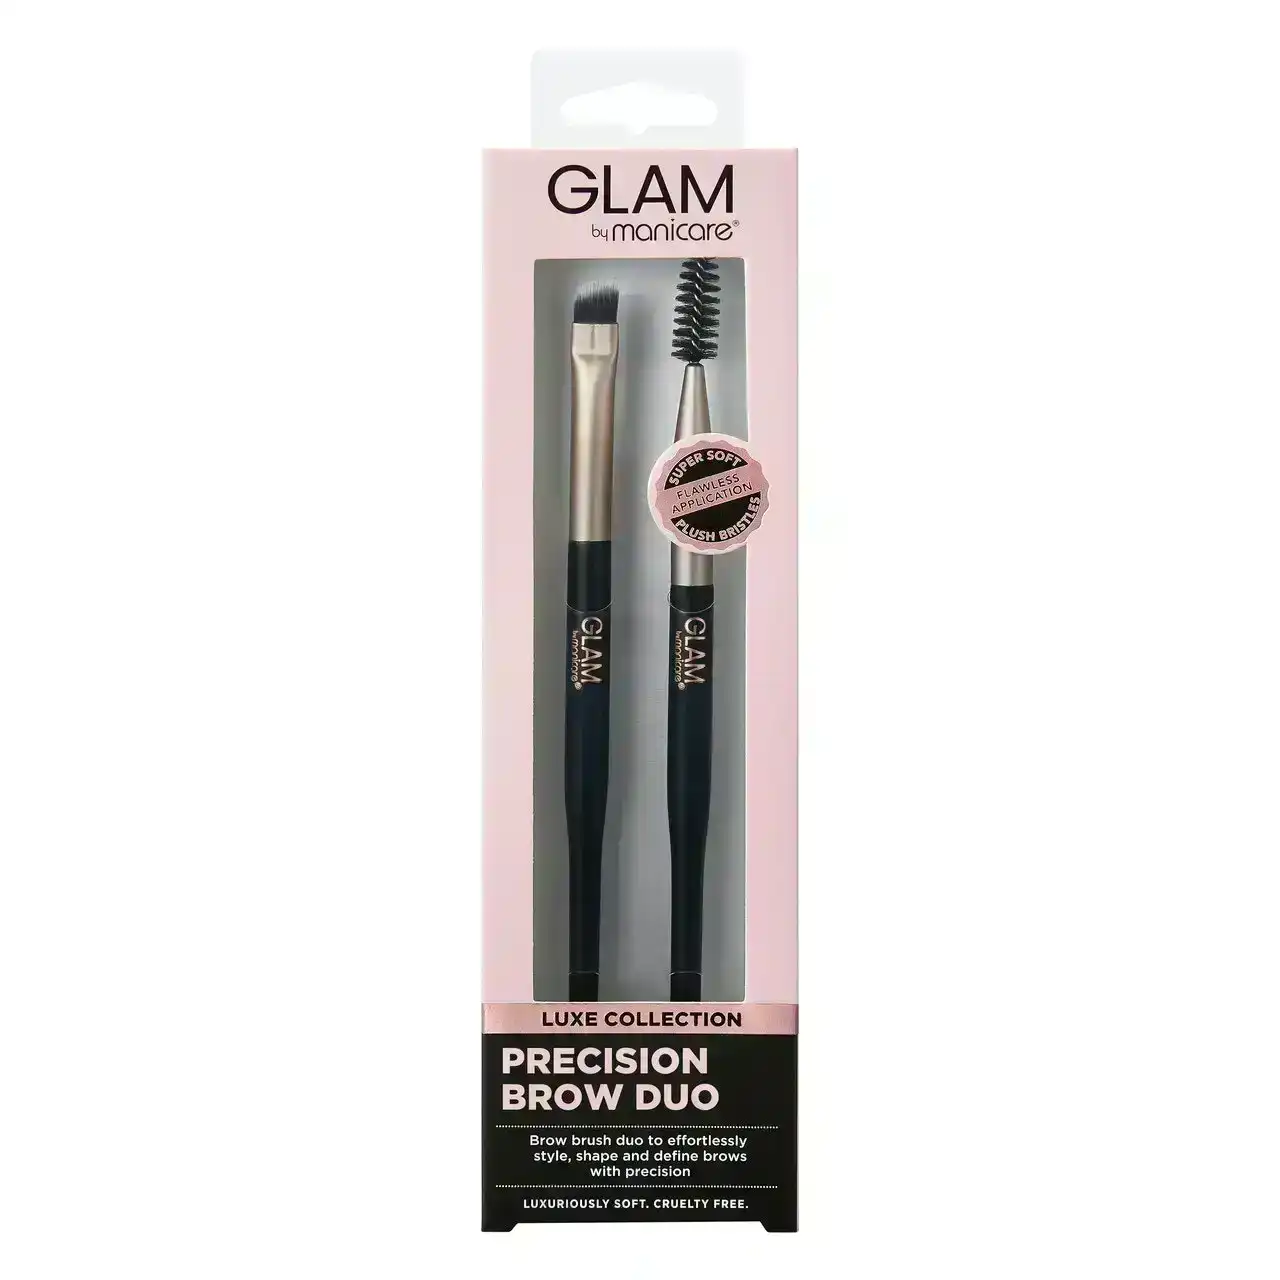 Glam by Manicare Precision Brow Duo